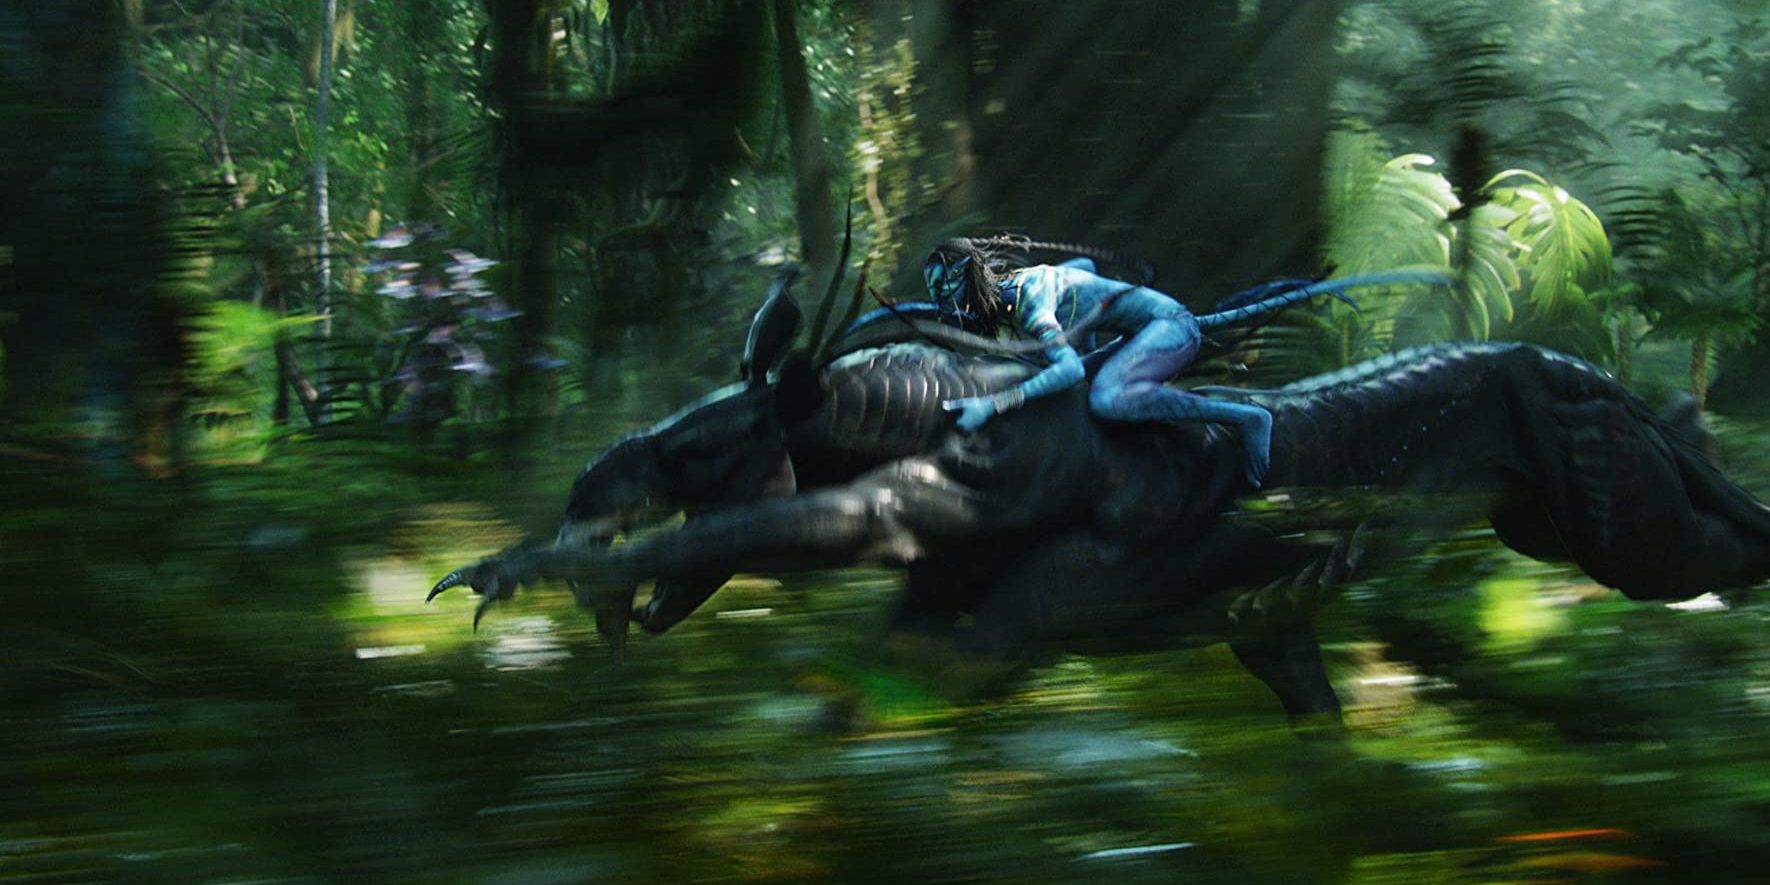 A chase sequence in James Cameron's Avatar